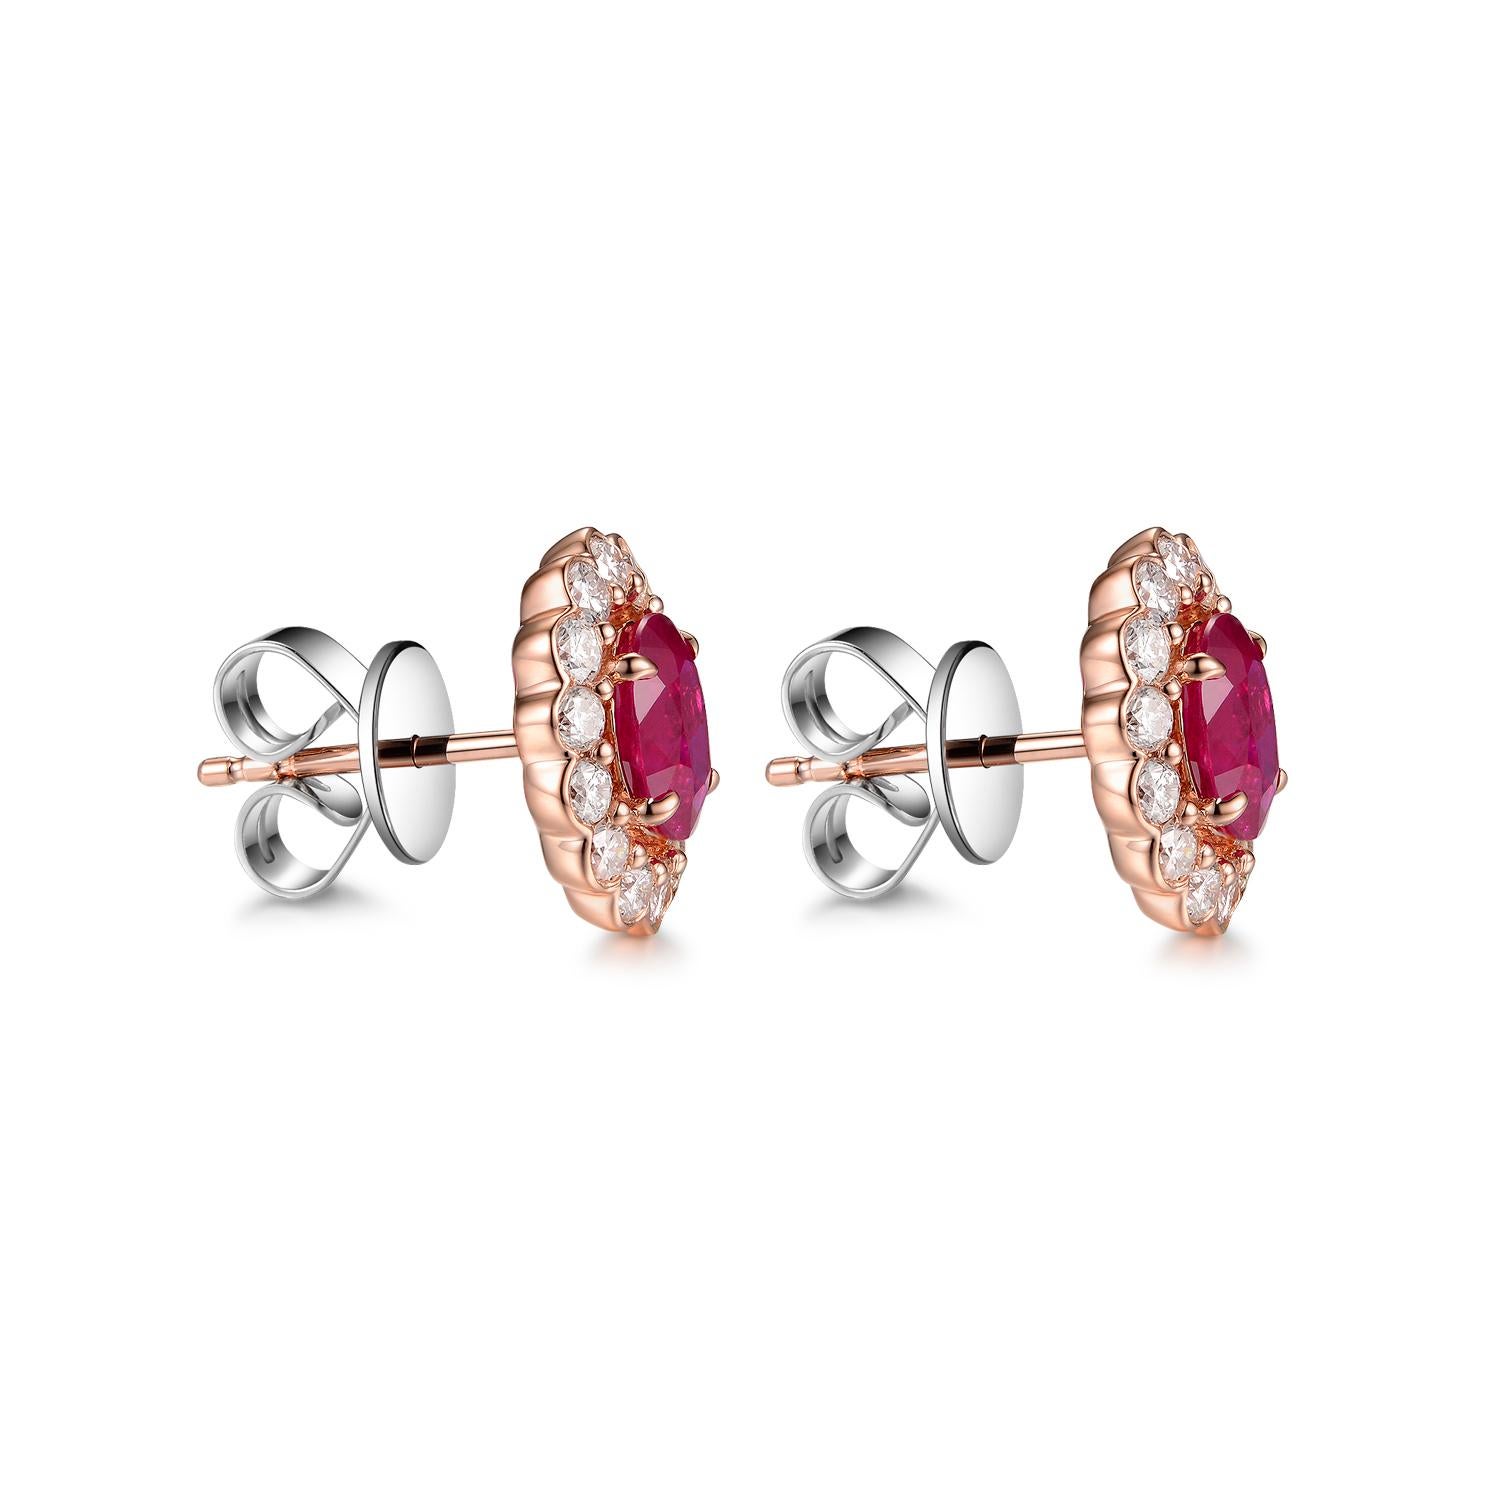 Introducing our Ruby Diamond Stud Earrings, exquisitely crafted in the romantic tones of 18K Rose Gold. These earrings feature the regal presence of rubies, totaling 1.36 carats, each stone radiating with a deep, crimson hue that captivates and